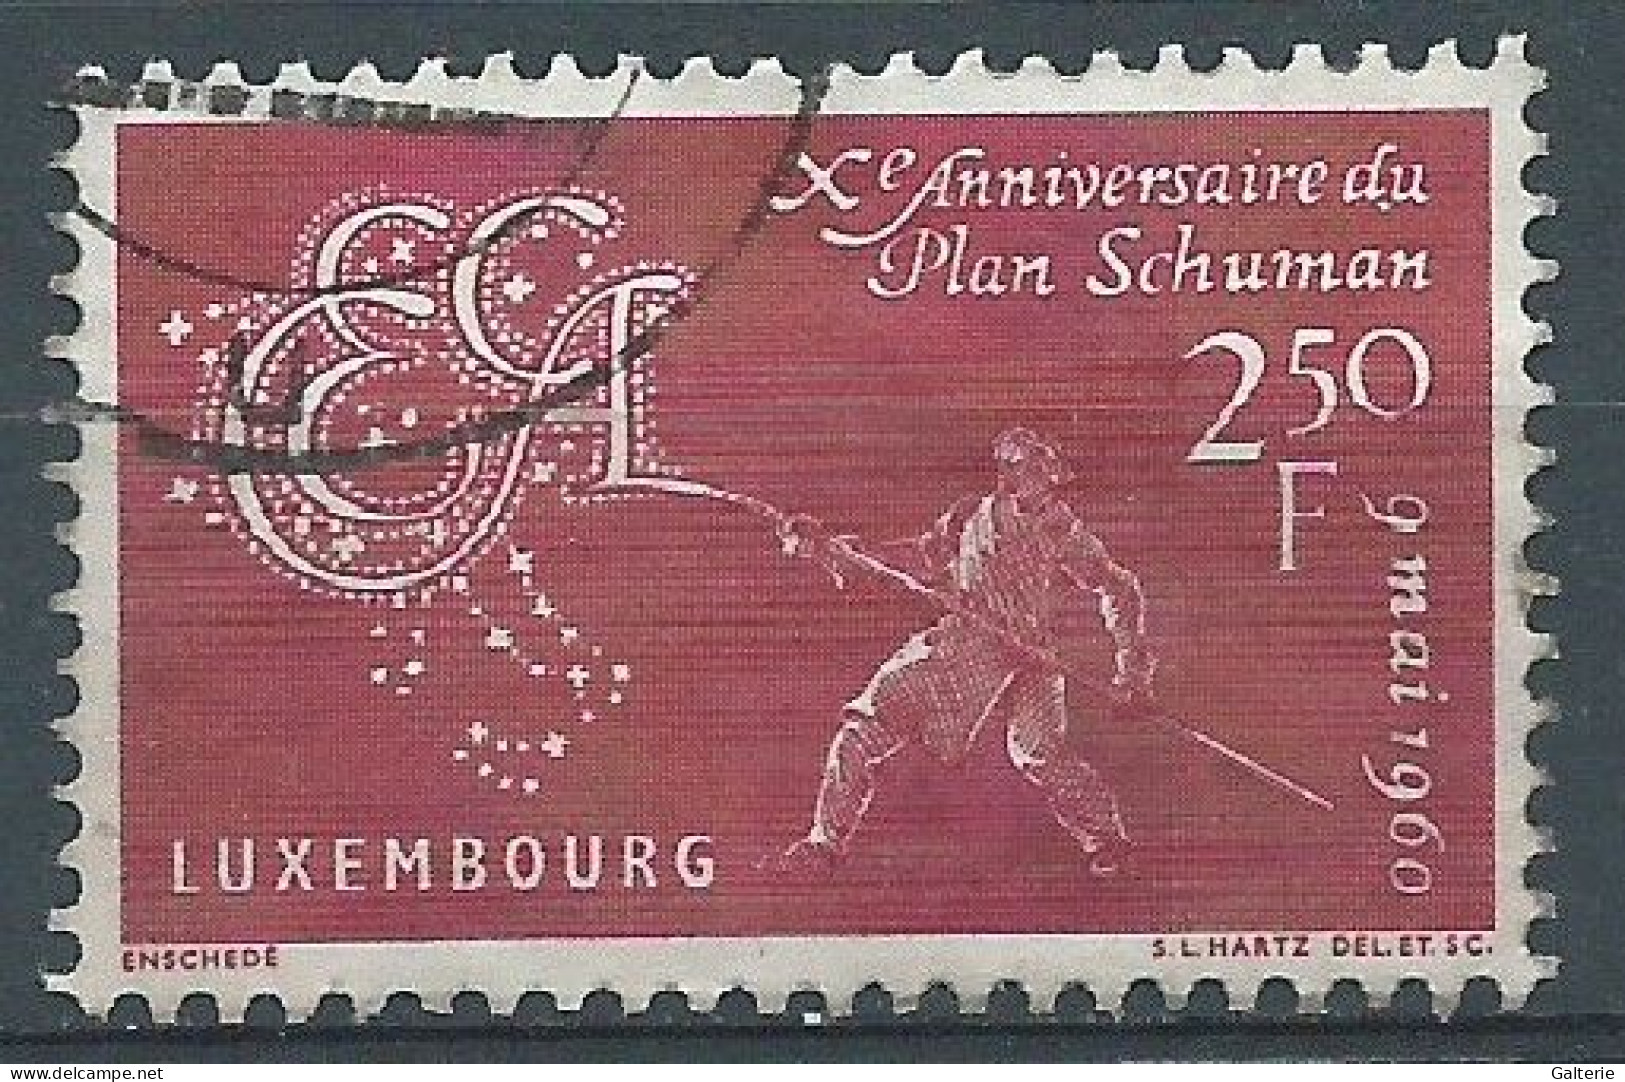 LUXEMBOURG - Obl - 1960 - YT N°578-10e Anniv Du Plan Schuman - Used Stamps